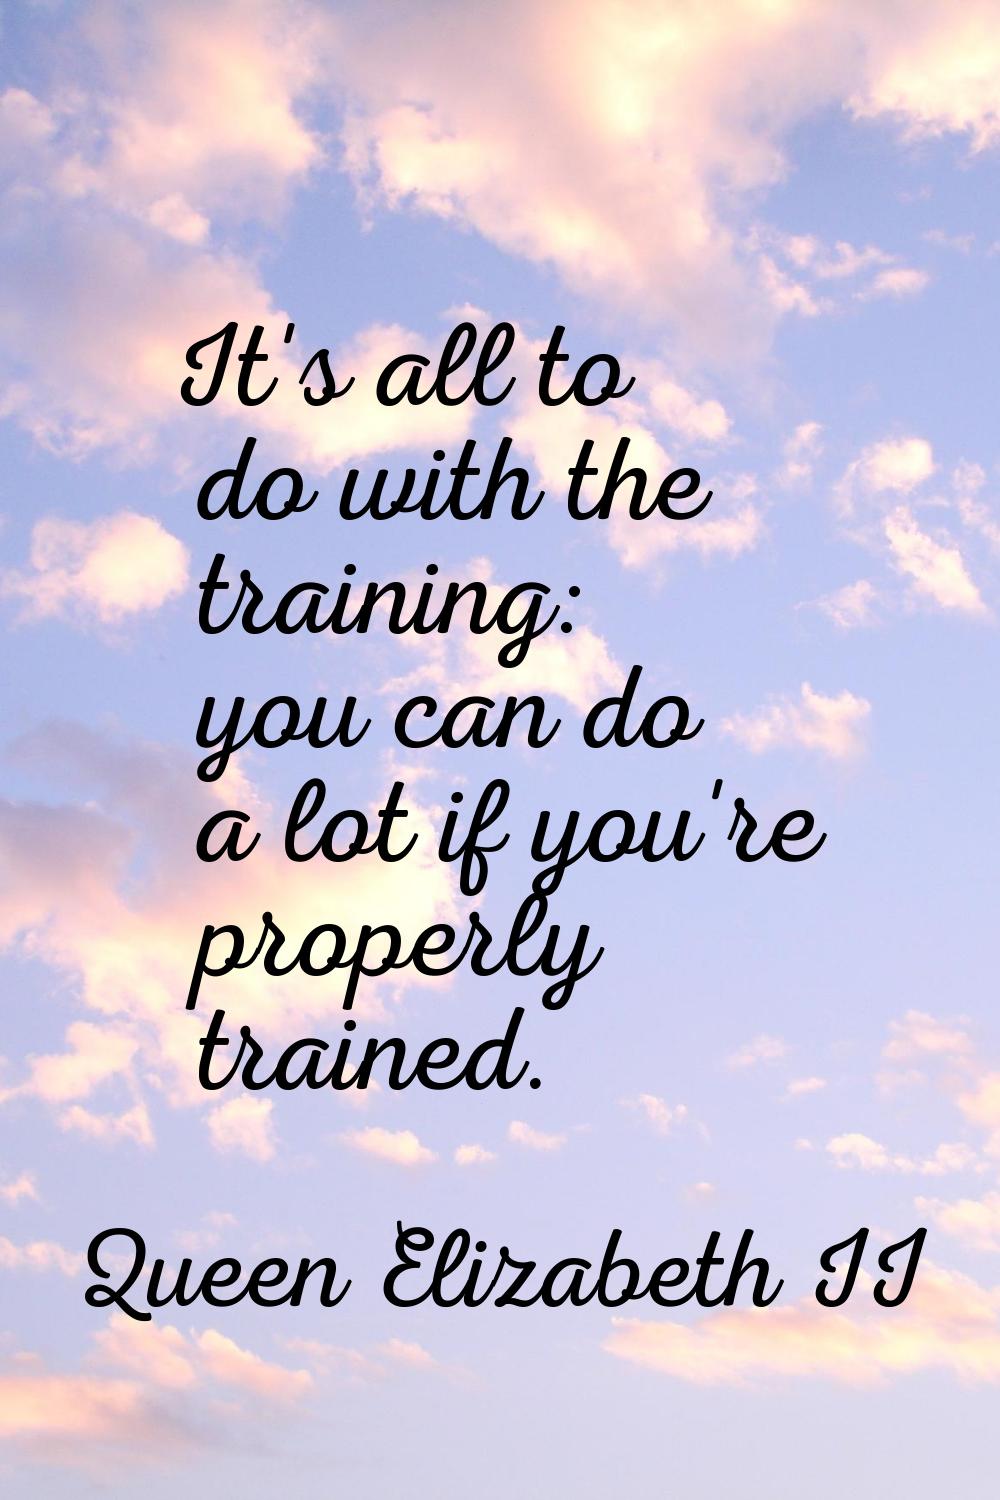 It's all to do with the training: you can do a lot if you're properly trained.